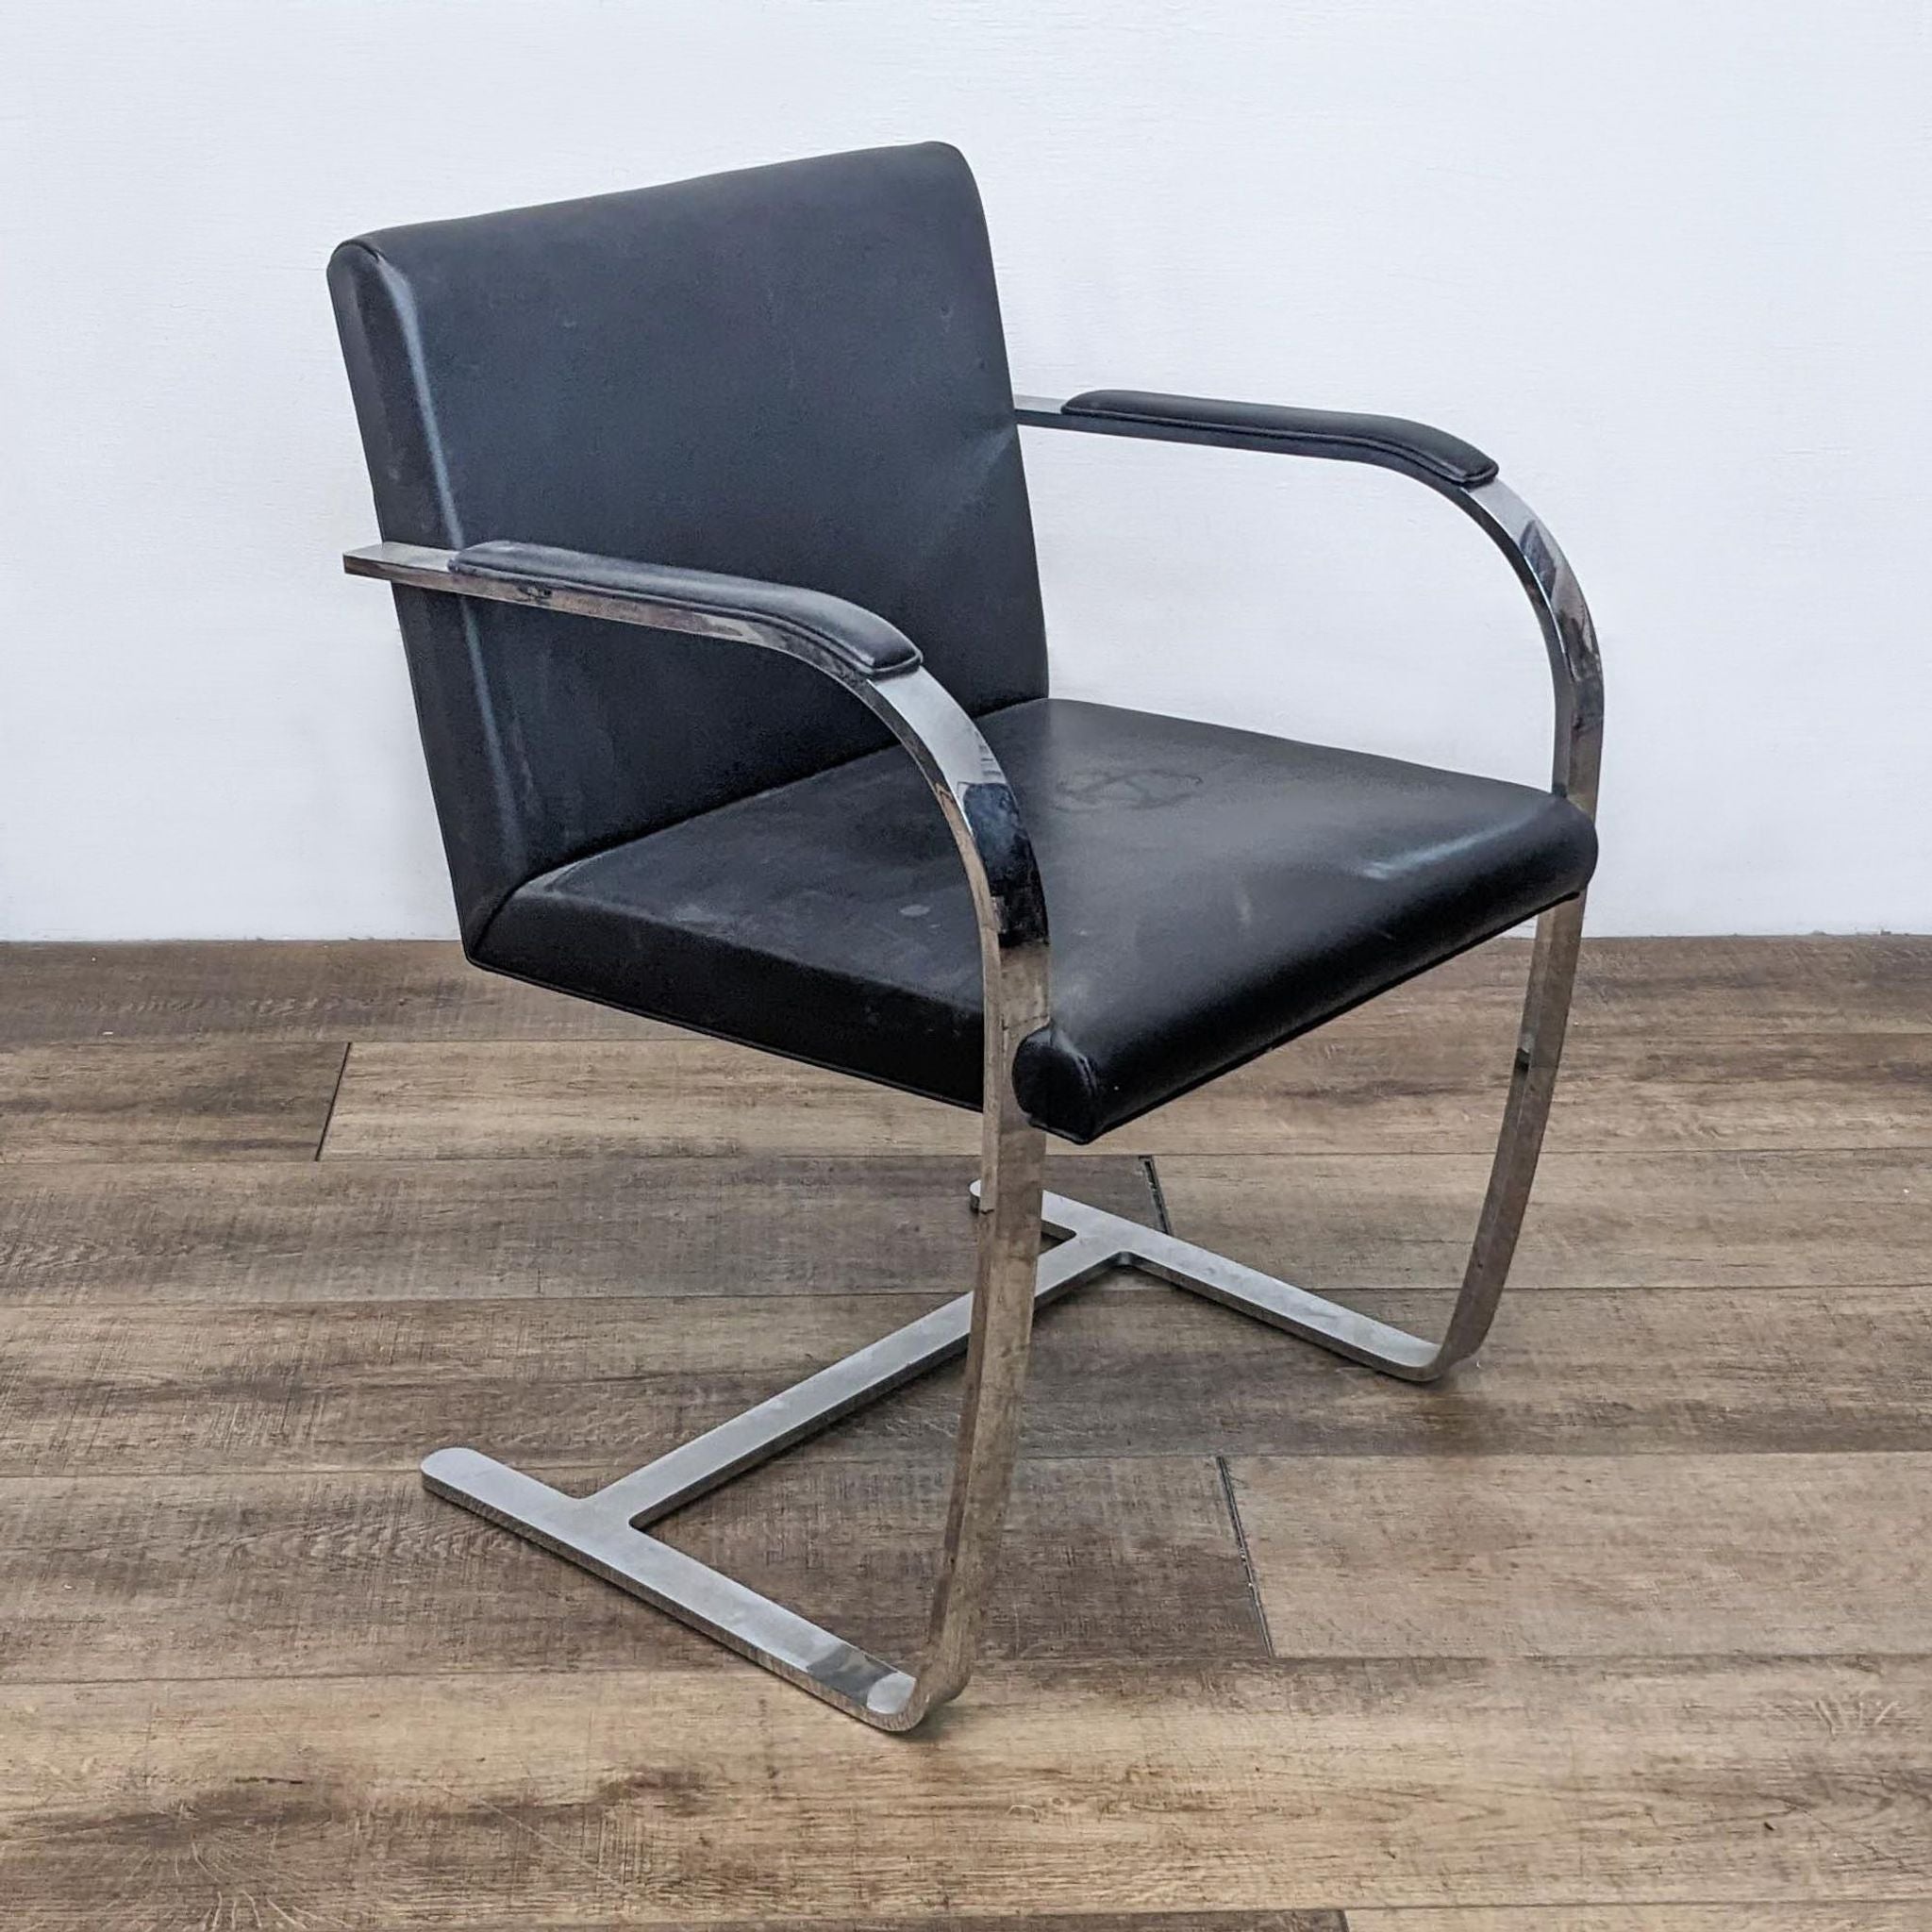 Alt text 2: Side angle of a Reperch stylish dining chair with continuous steel structure and padded black faux leather for comfortable seating.